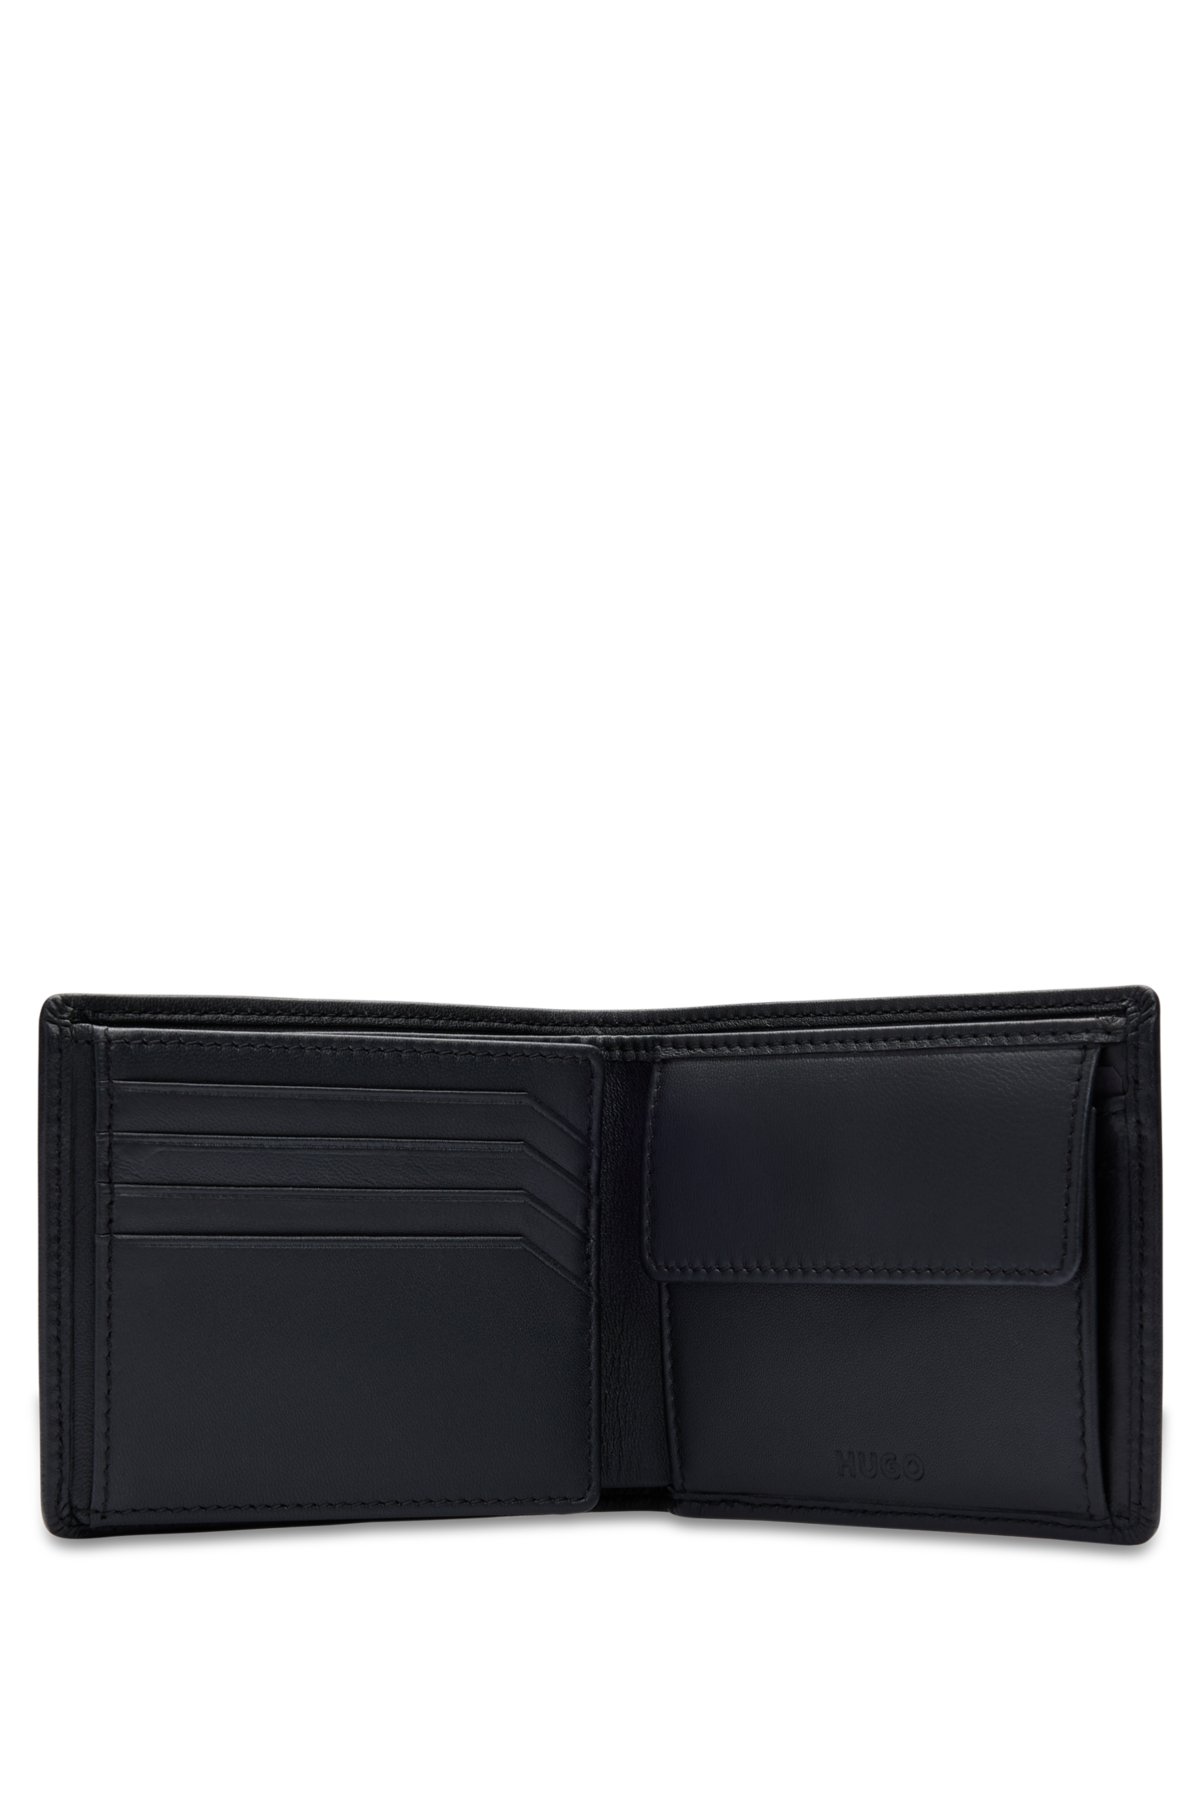 HUGO - Trifold wallet in smooth leather with metal-framed logo